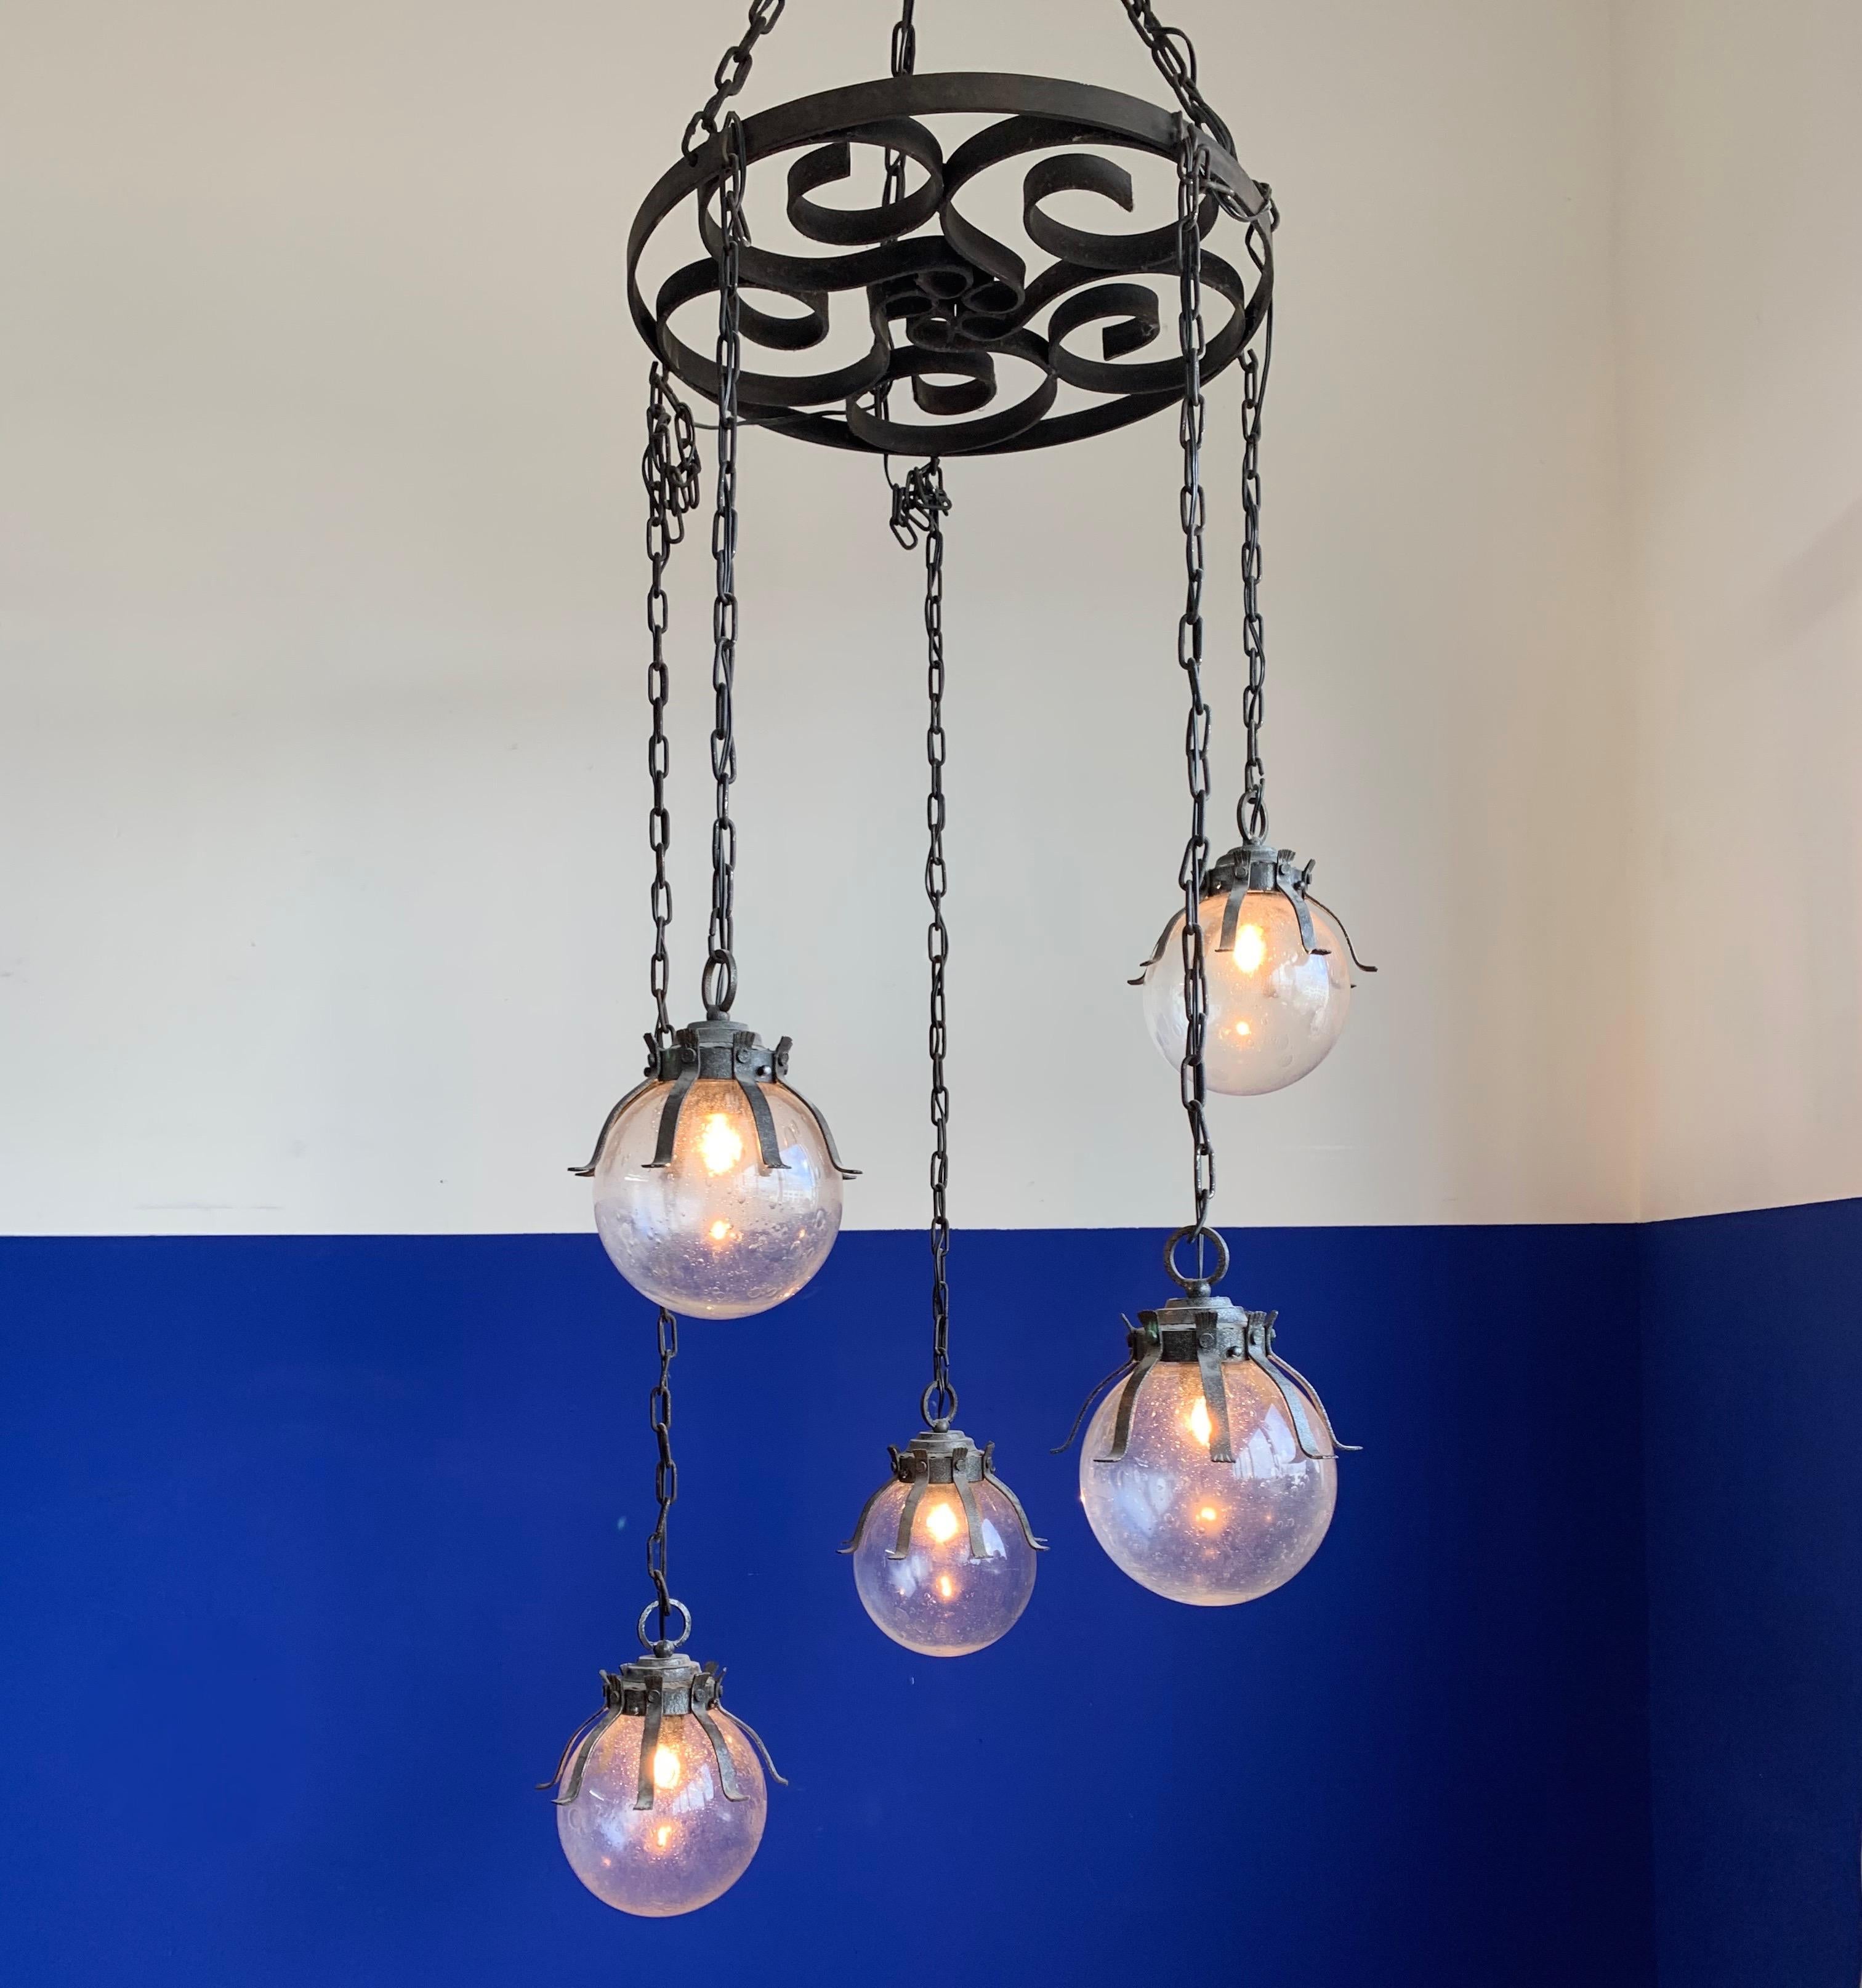 Large and wonderful, hand-crafted chandelier from the midcentury era.

If you are looking for a rare and beautiful fixture to grace your home then this handcrafted chandelier could be your perfect lighting decoration. One of our specialties is early